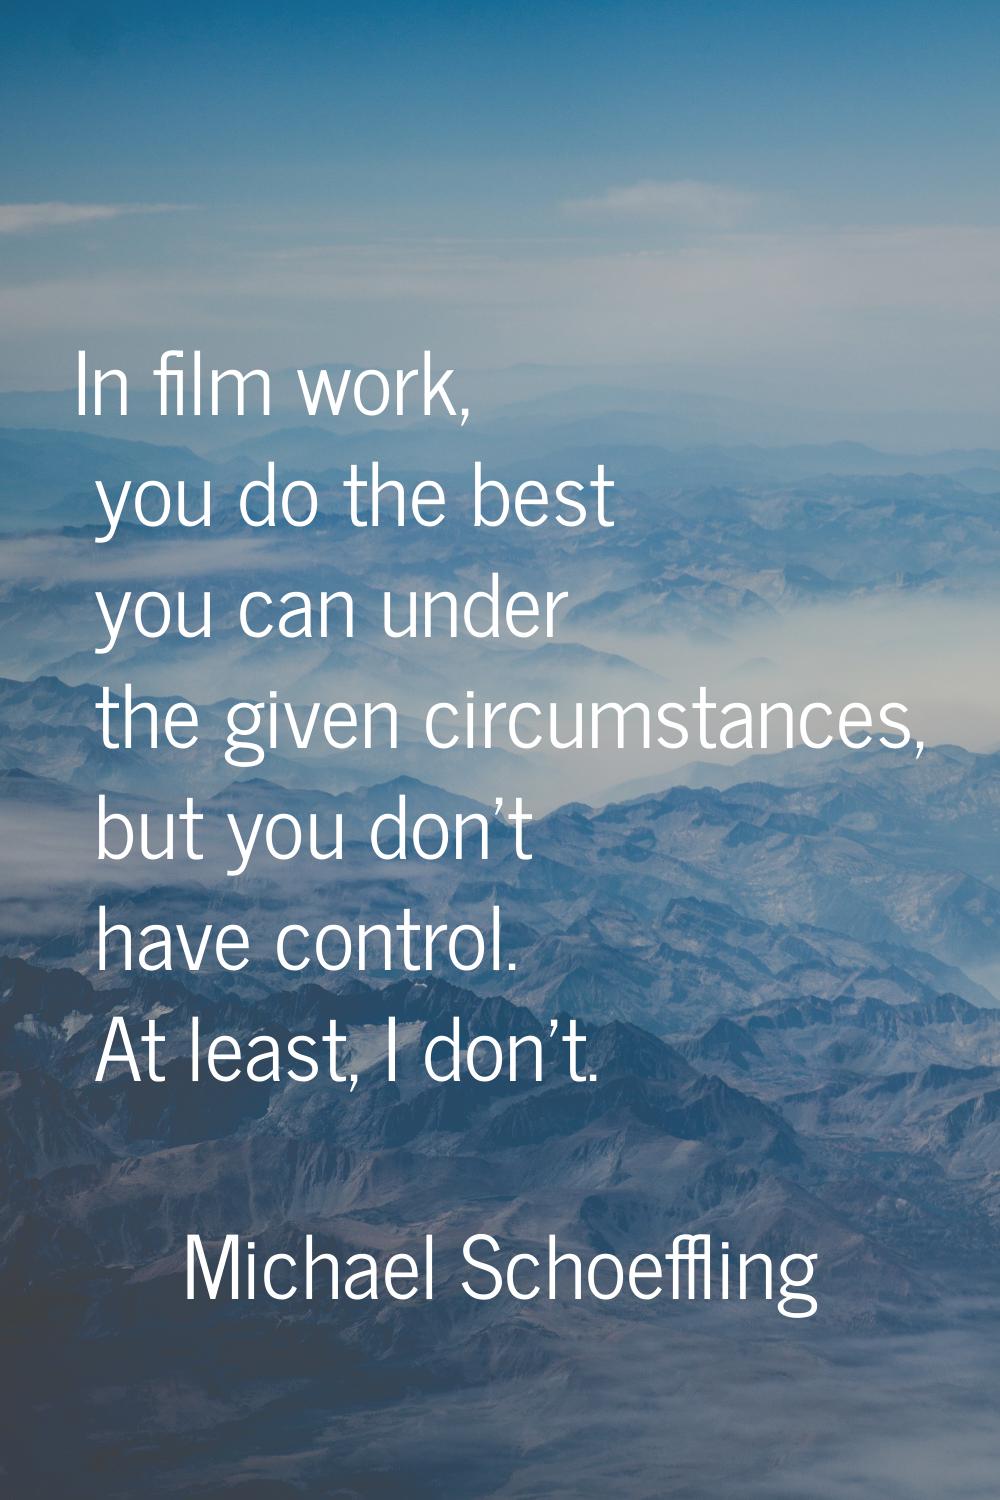 In film work, you do the best you can under the given circumstances, but you don't have control. At